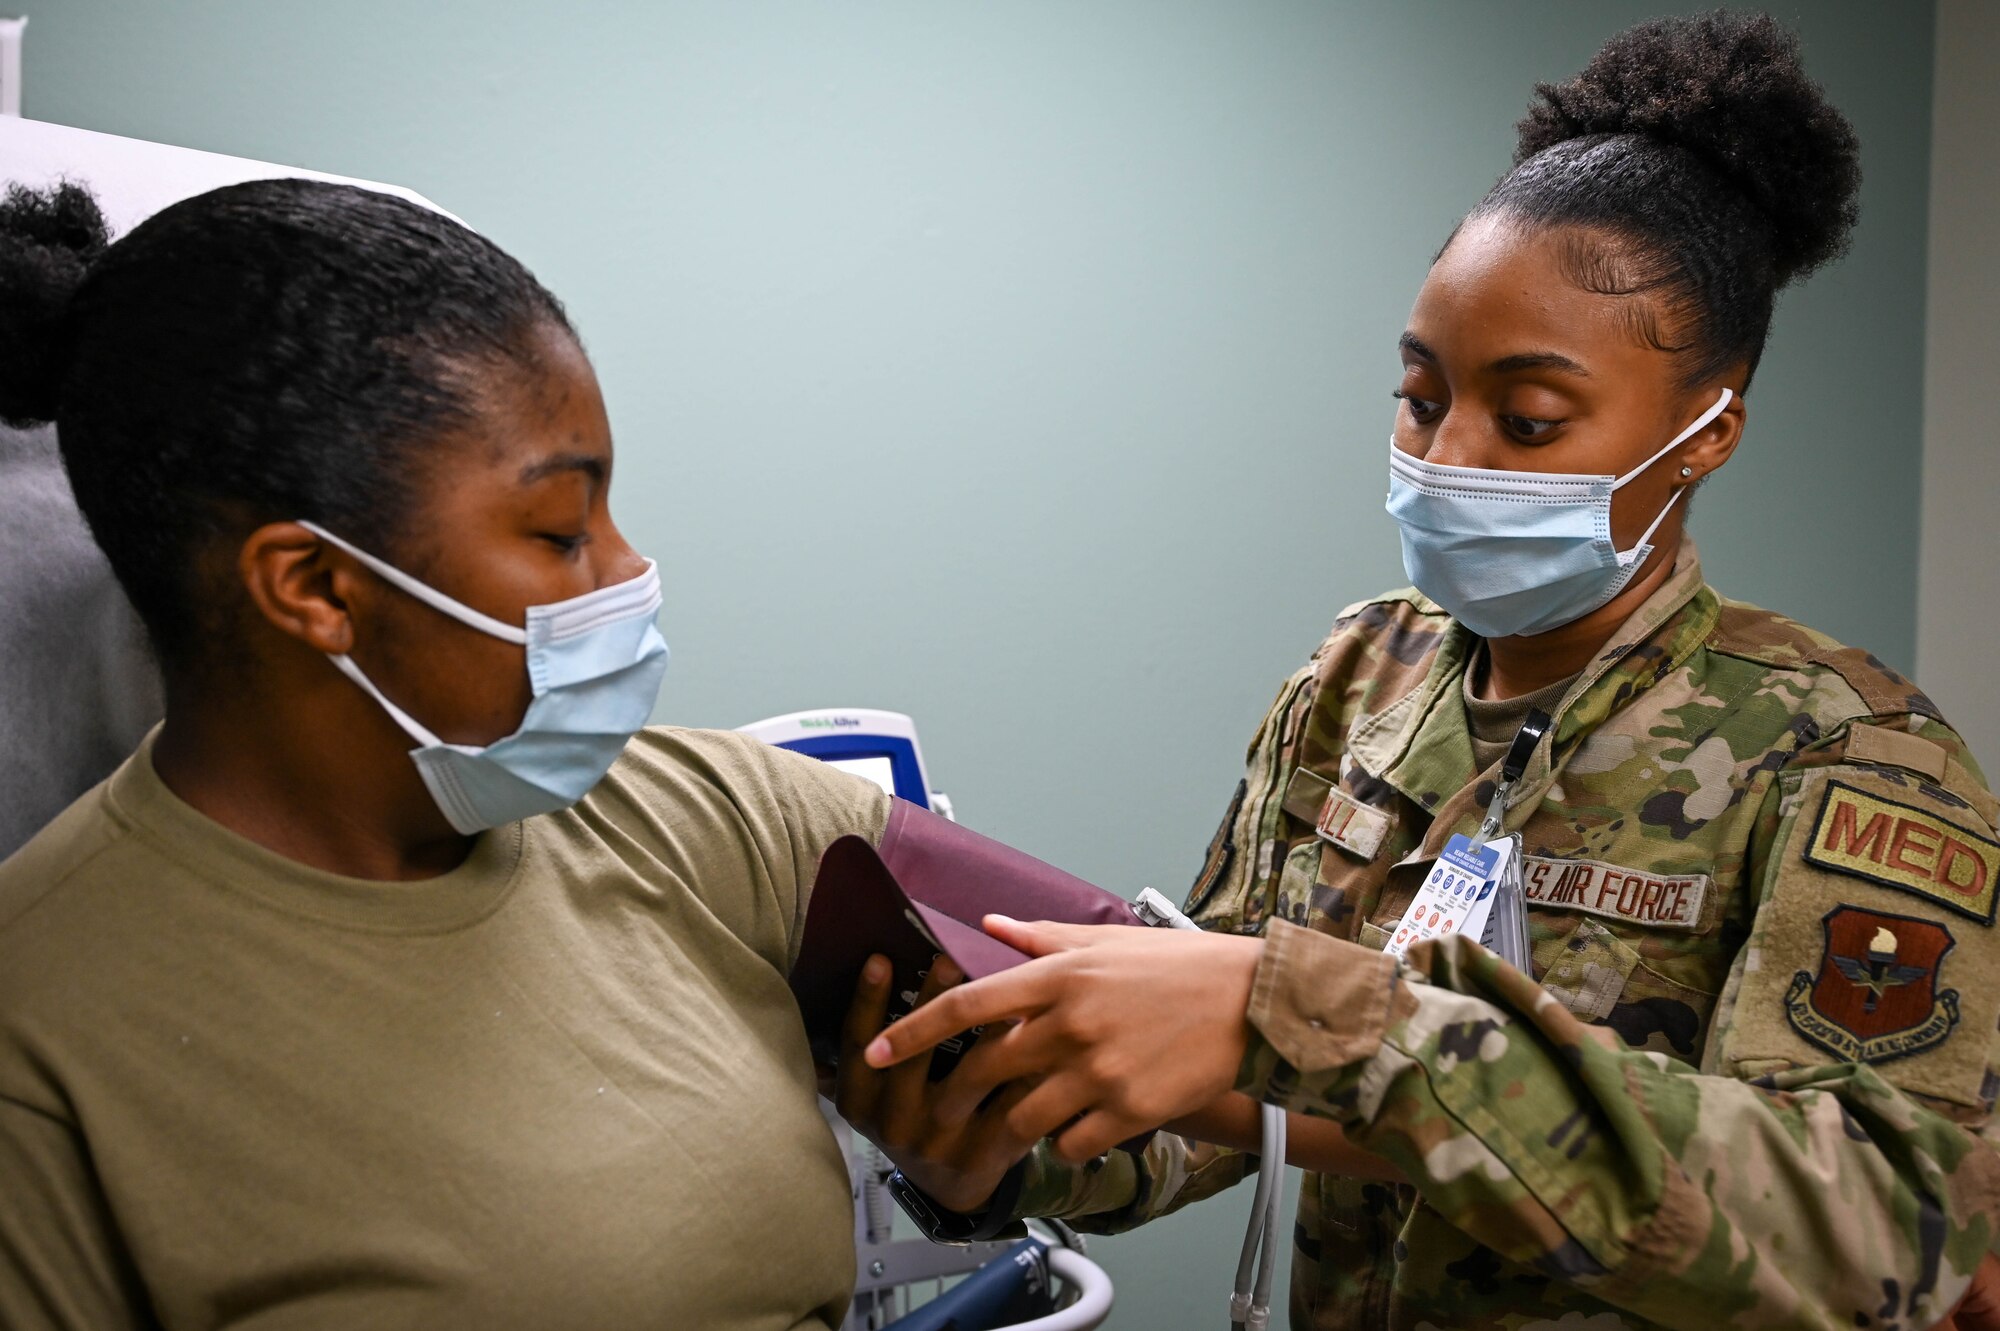 U.S. Air Force Airman 1st Class Trinity Randall, 97th Operational Medical Readiness Squadron (OMRS) medical technician, checks the blood pressure of Senior Airman Alexzandria Body, 97th OMRS front desk clerk, at Altus Air Force Base, Oklahoma, May 9, 2022. Randall said her favorite thing about being a medical technician is helping patients and she has always dreamed of being part of the medical field. (U.S. Air Force photo Senior Airman Kayla Christenson)